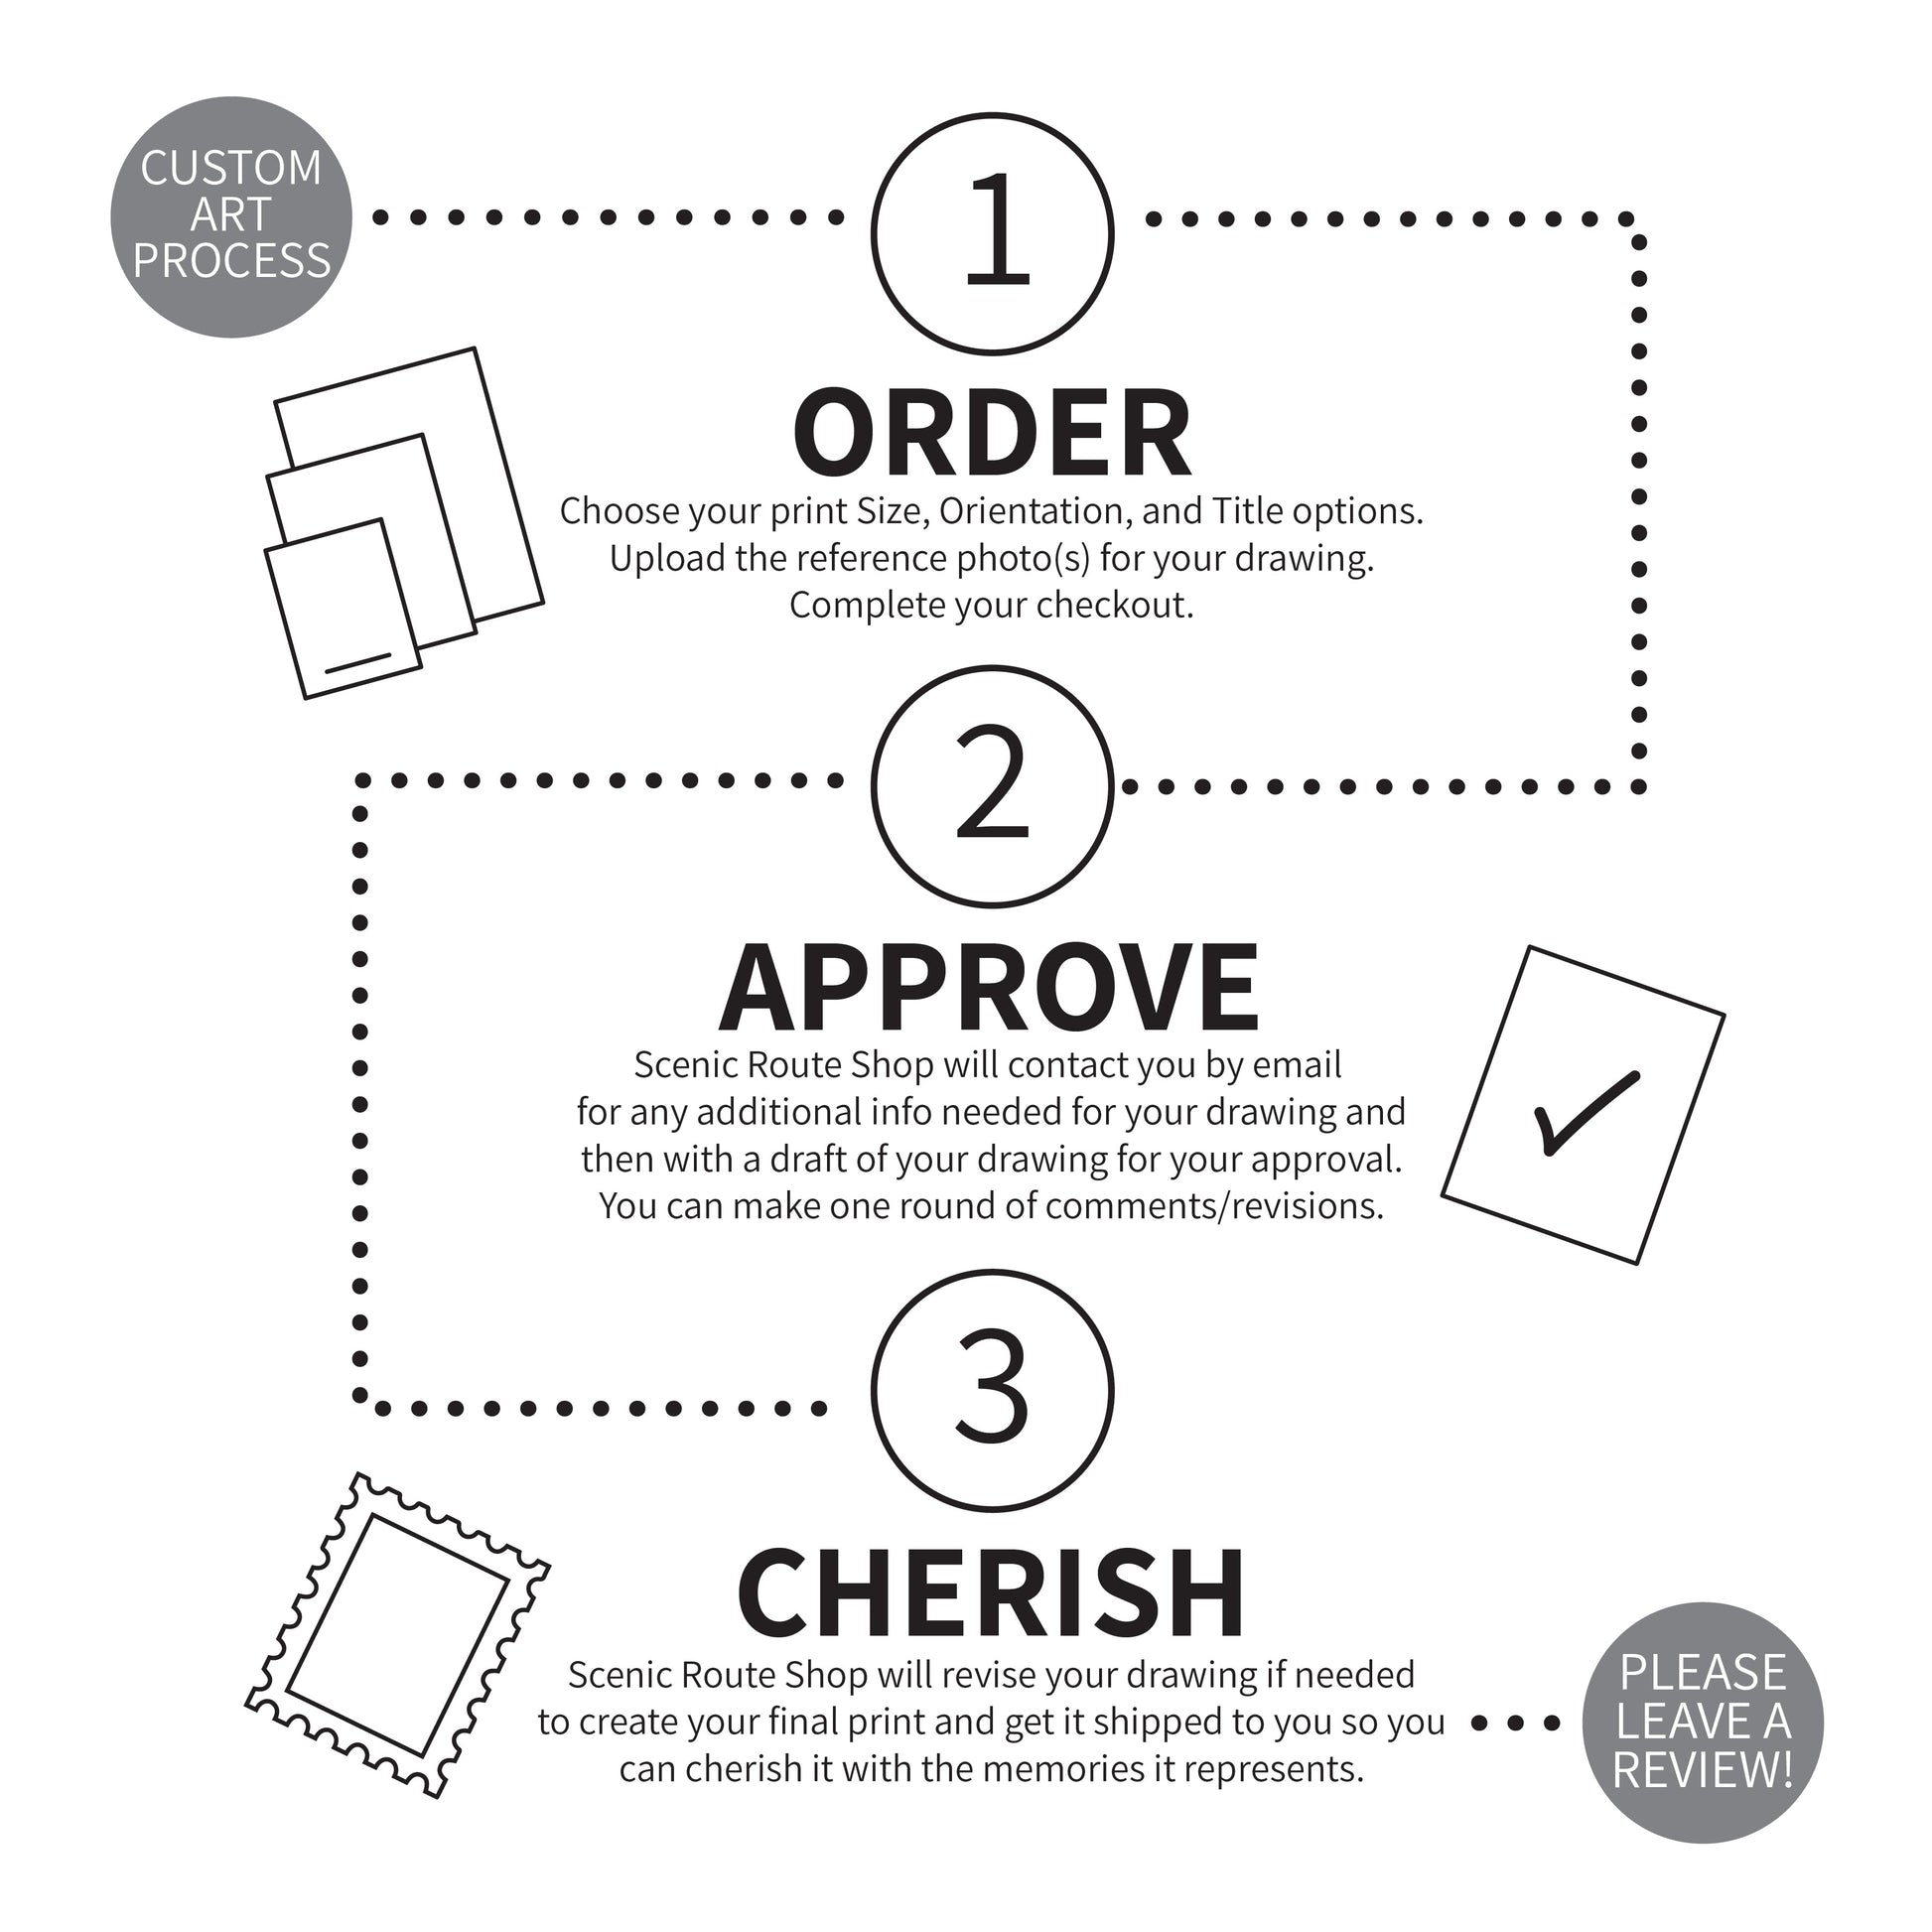 The Custom Order Process for Scenic Route Shop